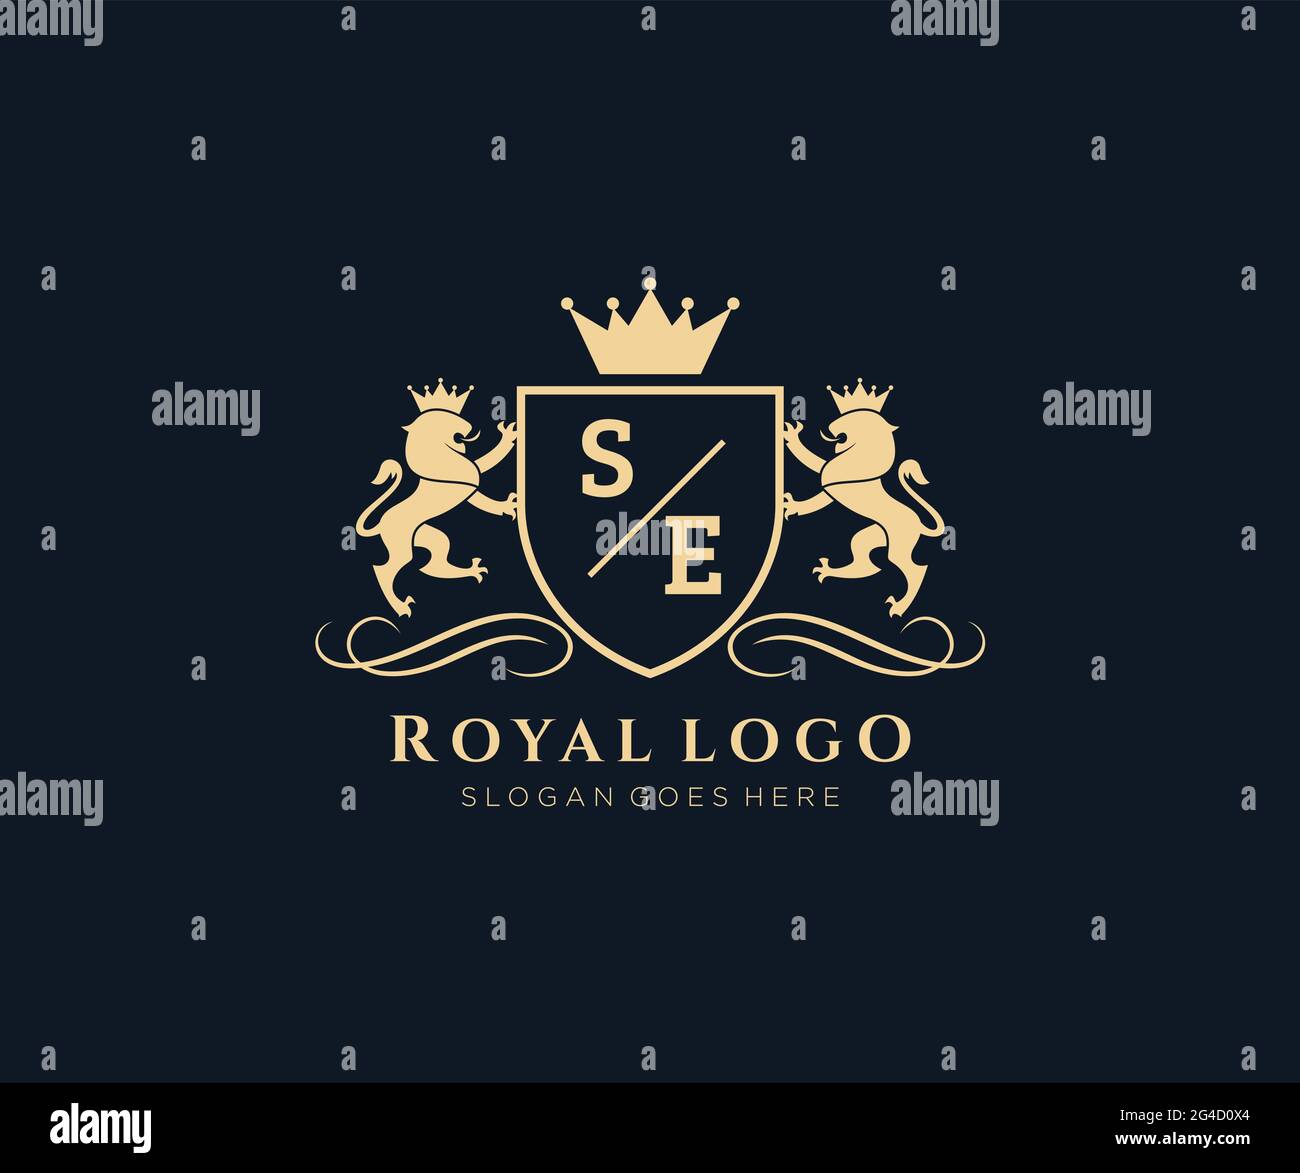 SE Letter Lion Royal Luxury Heraldic,Crest Logo template in vector art for Restaurant, Royalty, Boutique, Cafe, Hotel, Heraldic, Jewelry, Fashion and Stock Vector